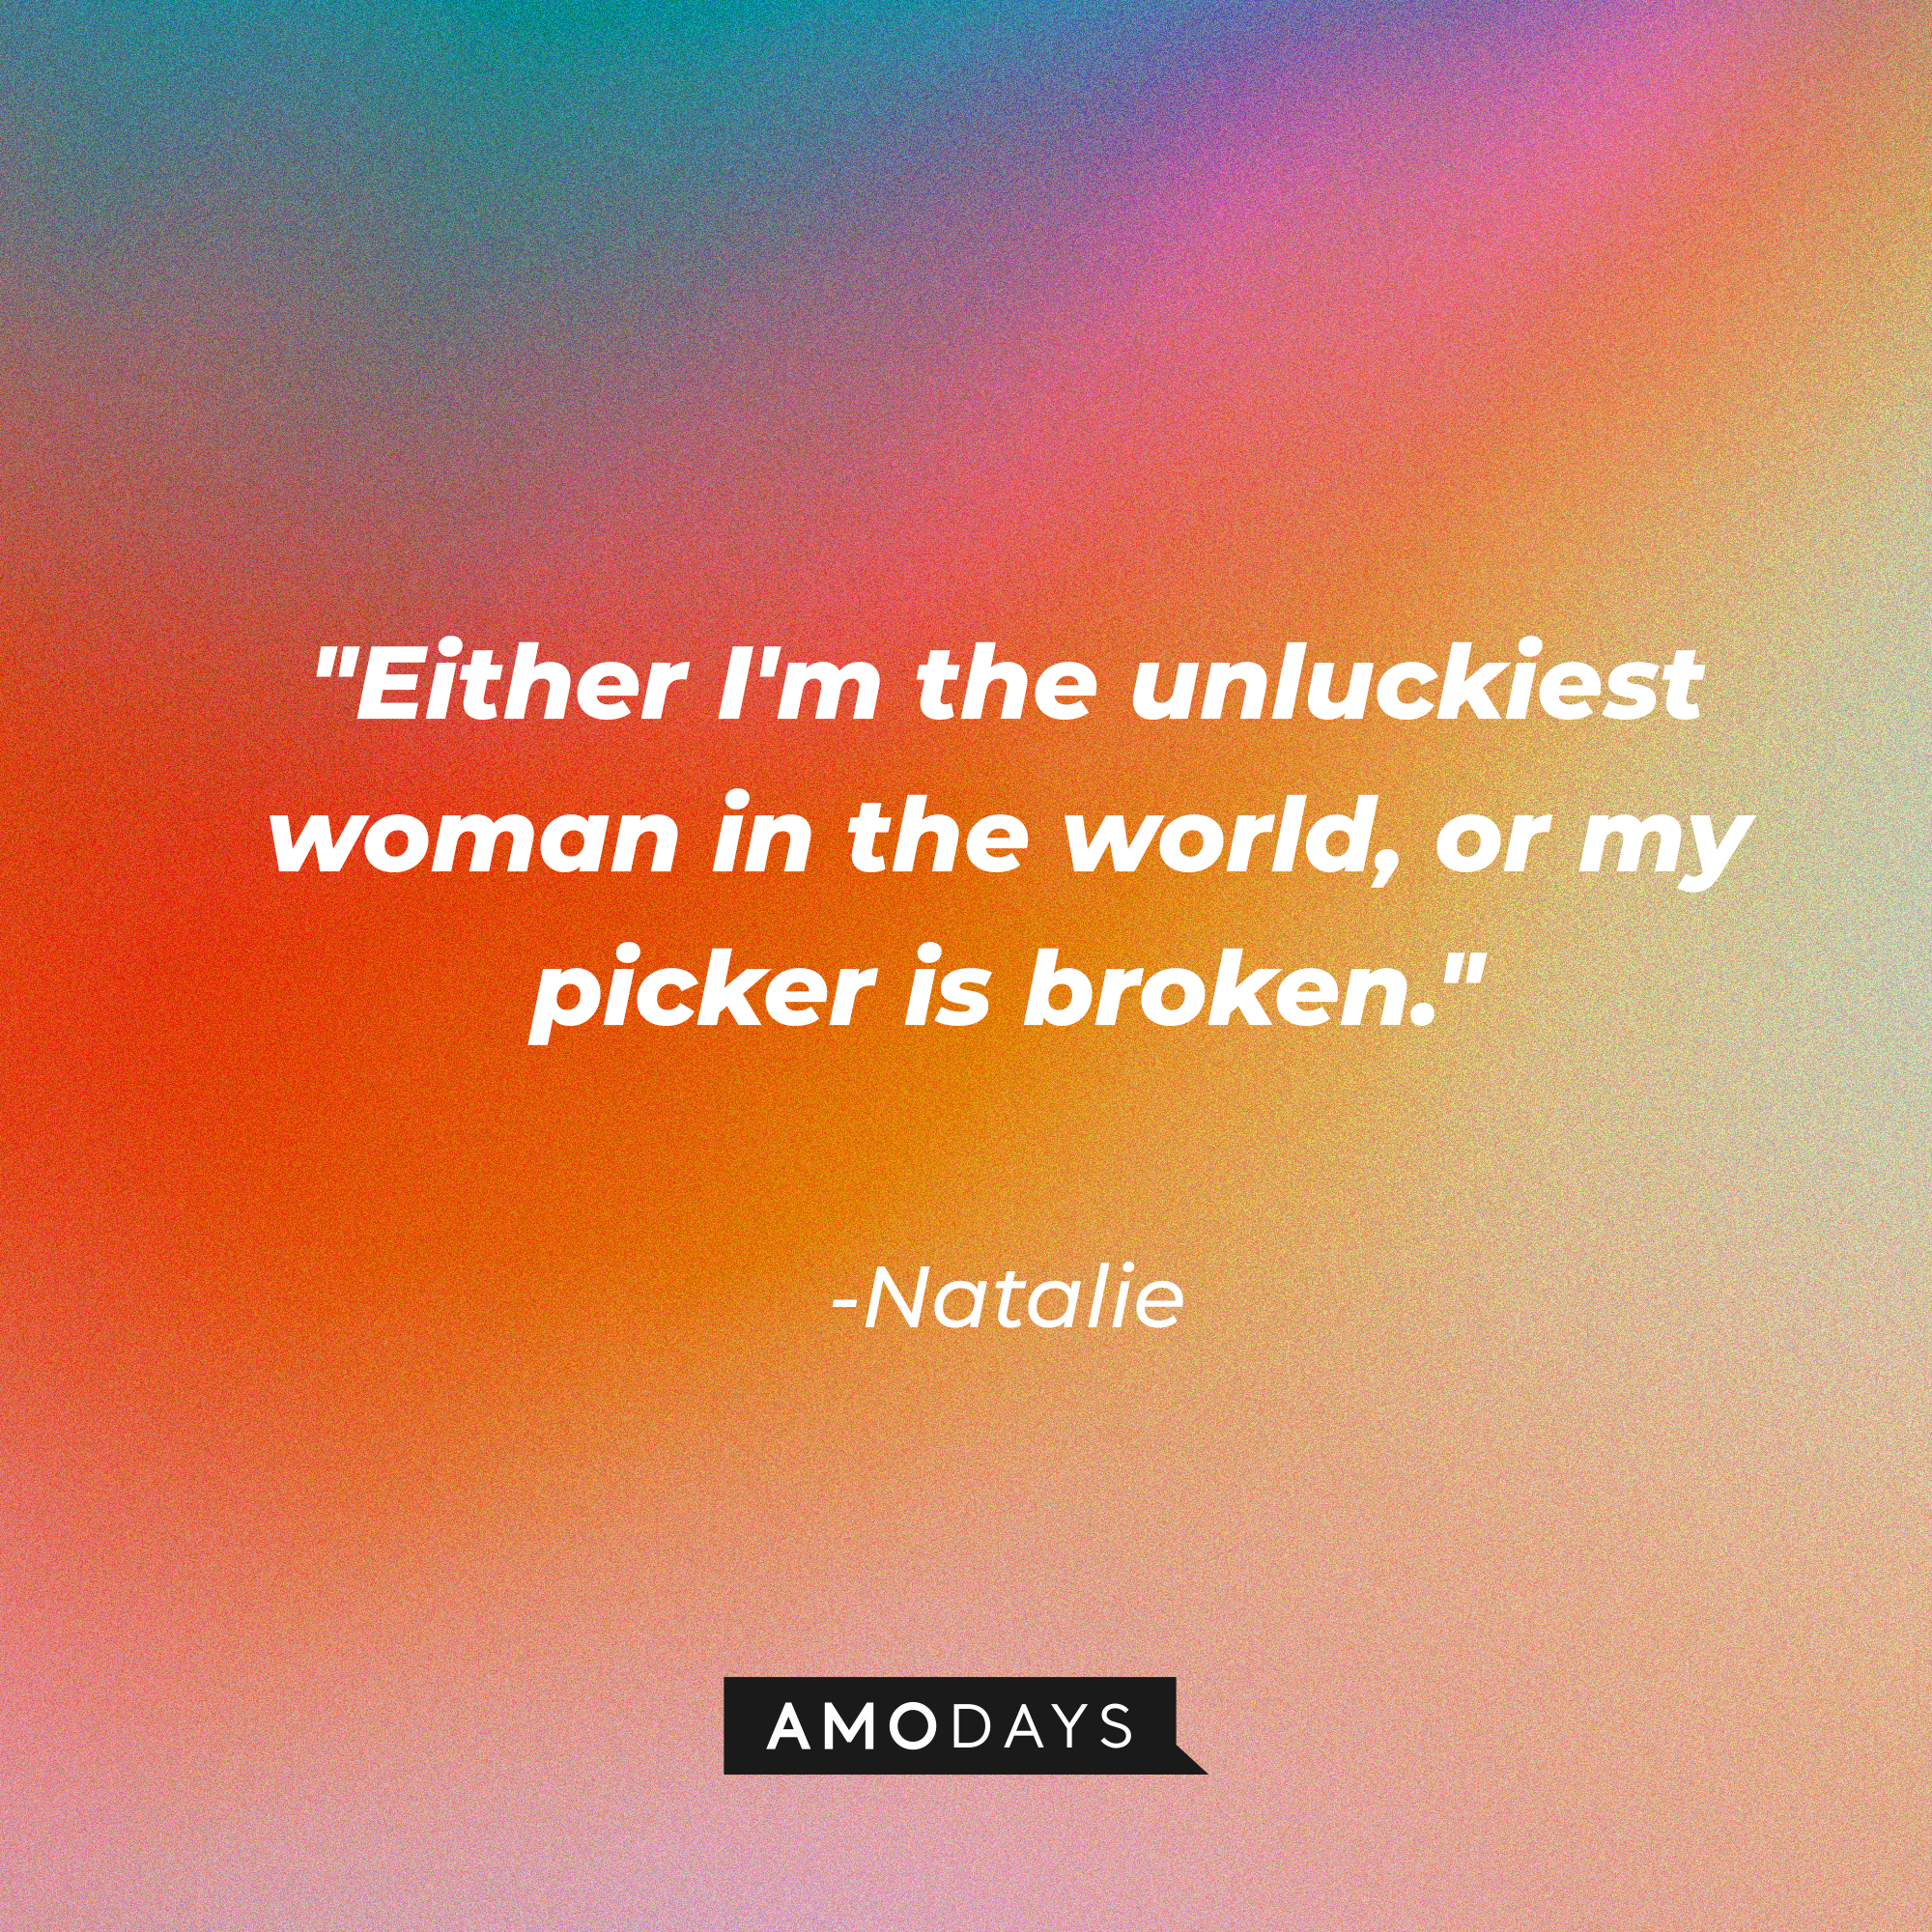 Natalie’s quote: "Either I'm the unluckiest woman in the world, or my picker is broken." | Source: AmoDays